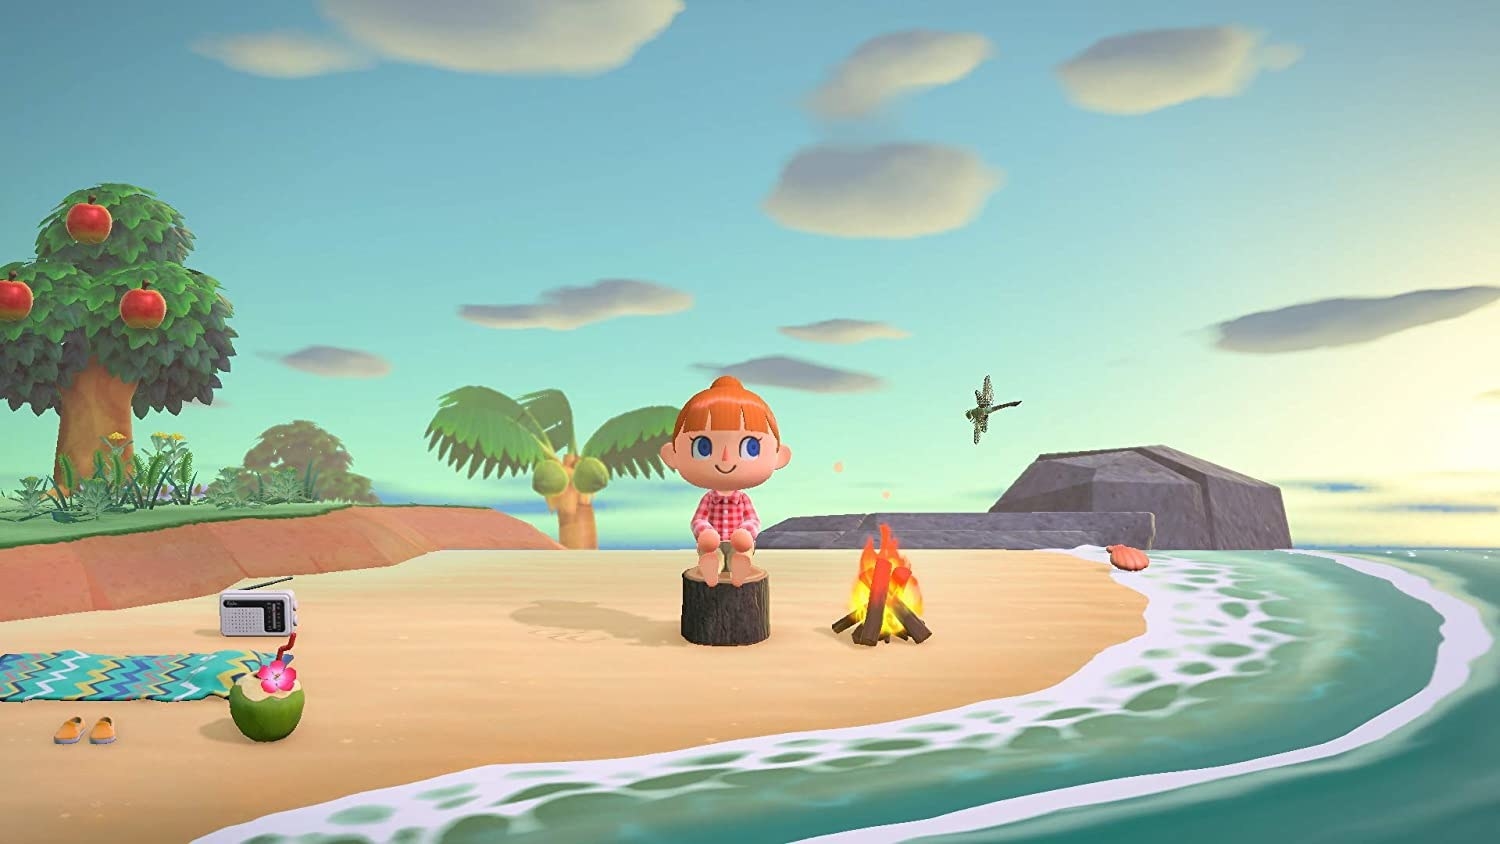 A screenshot from the game of a character sitting on her own island.